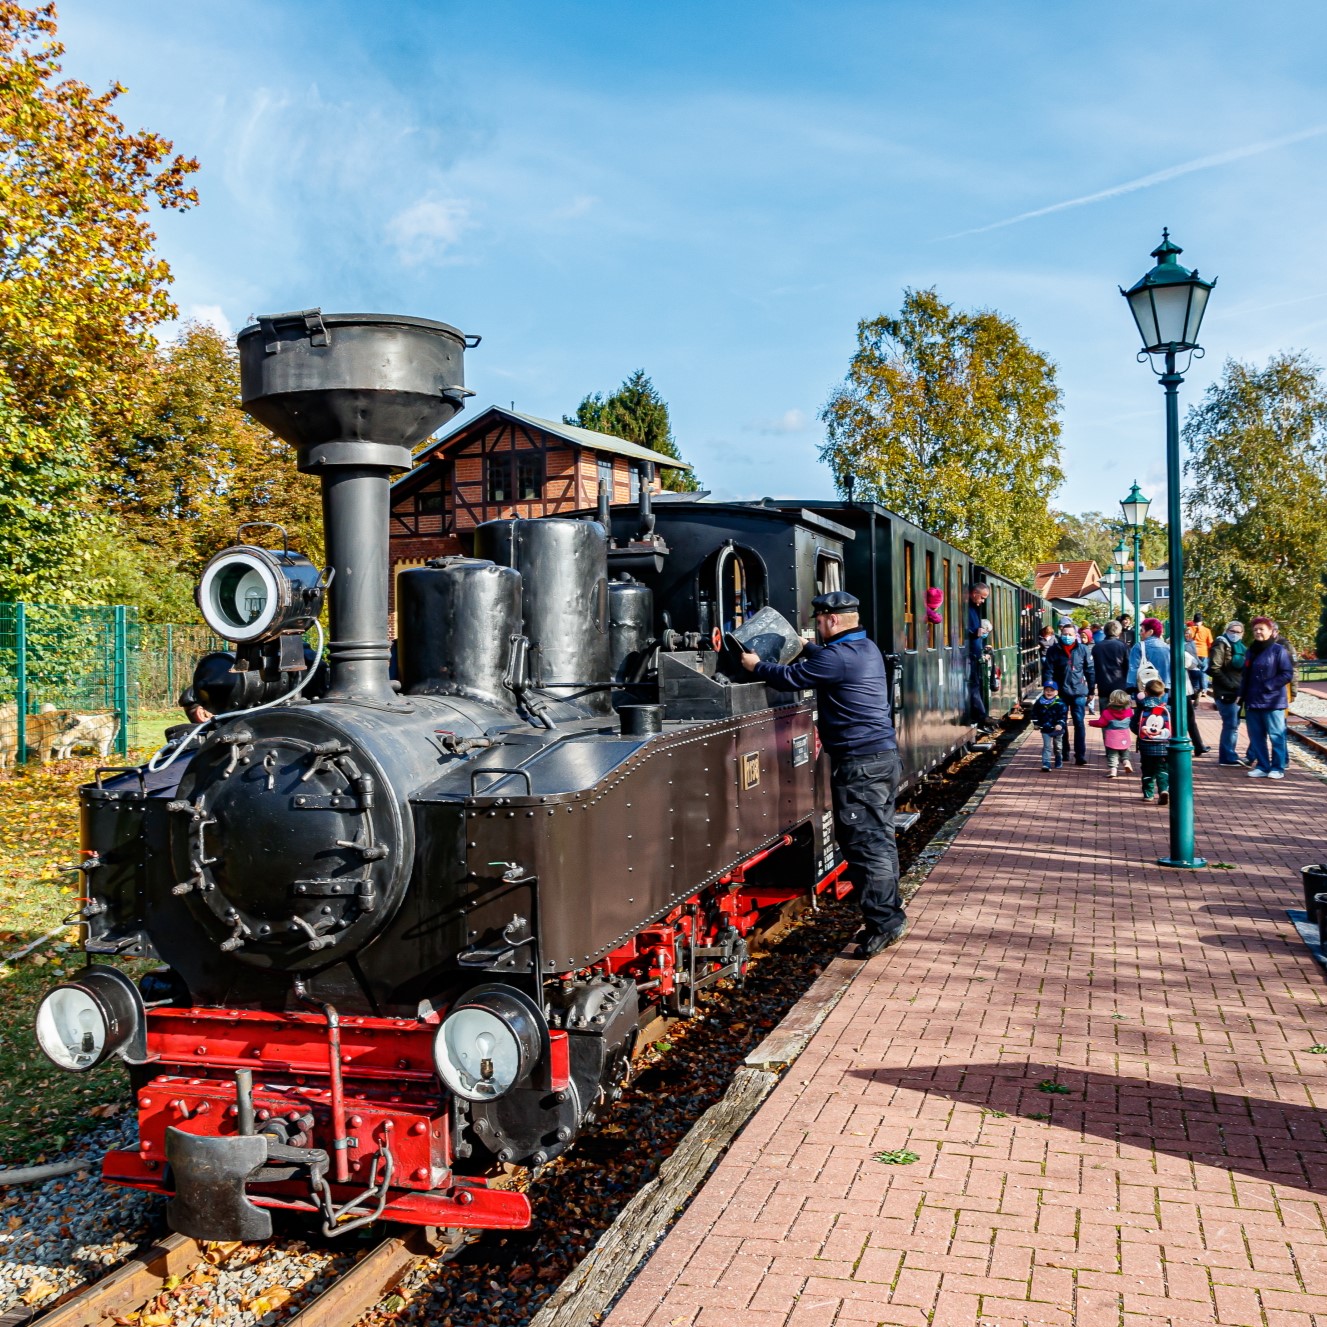 Historic small train at the station with engine driver.